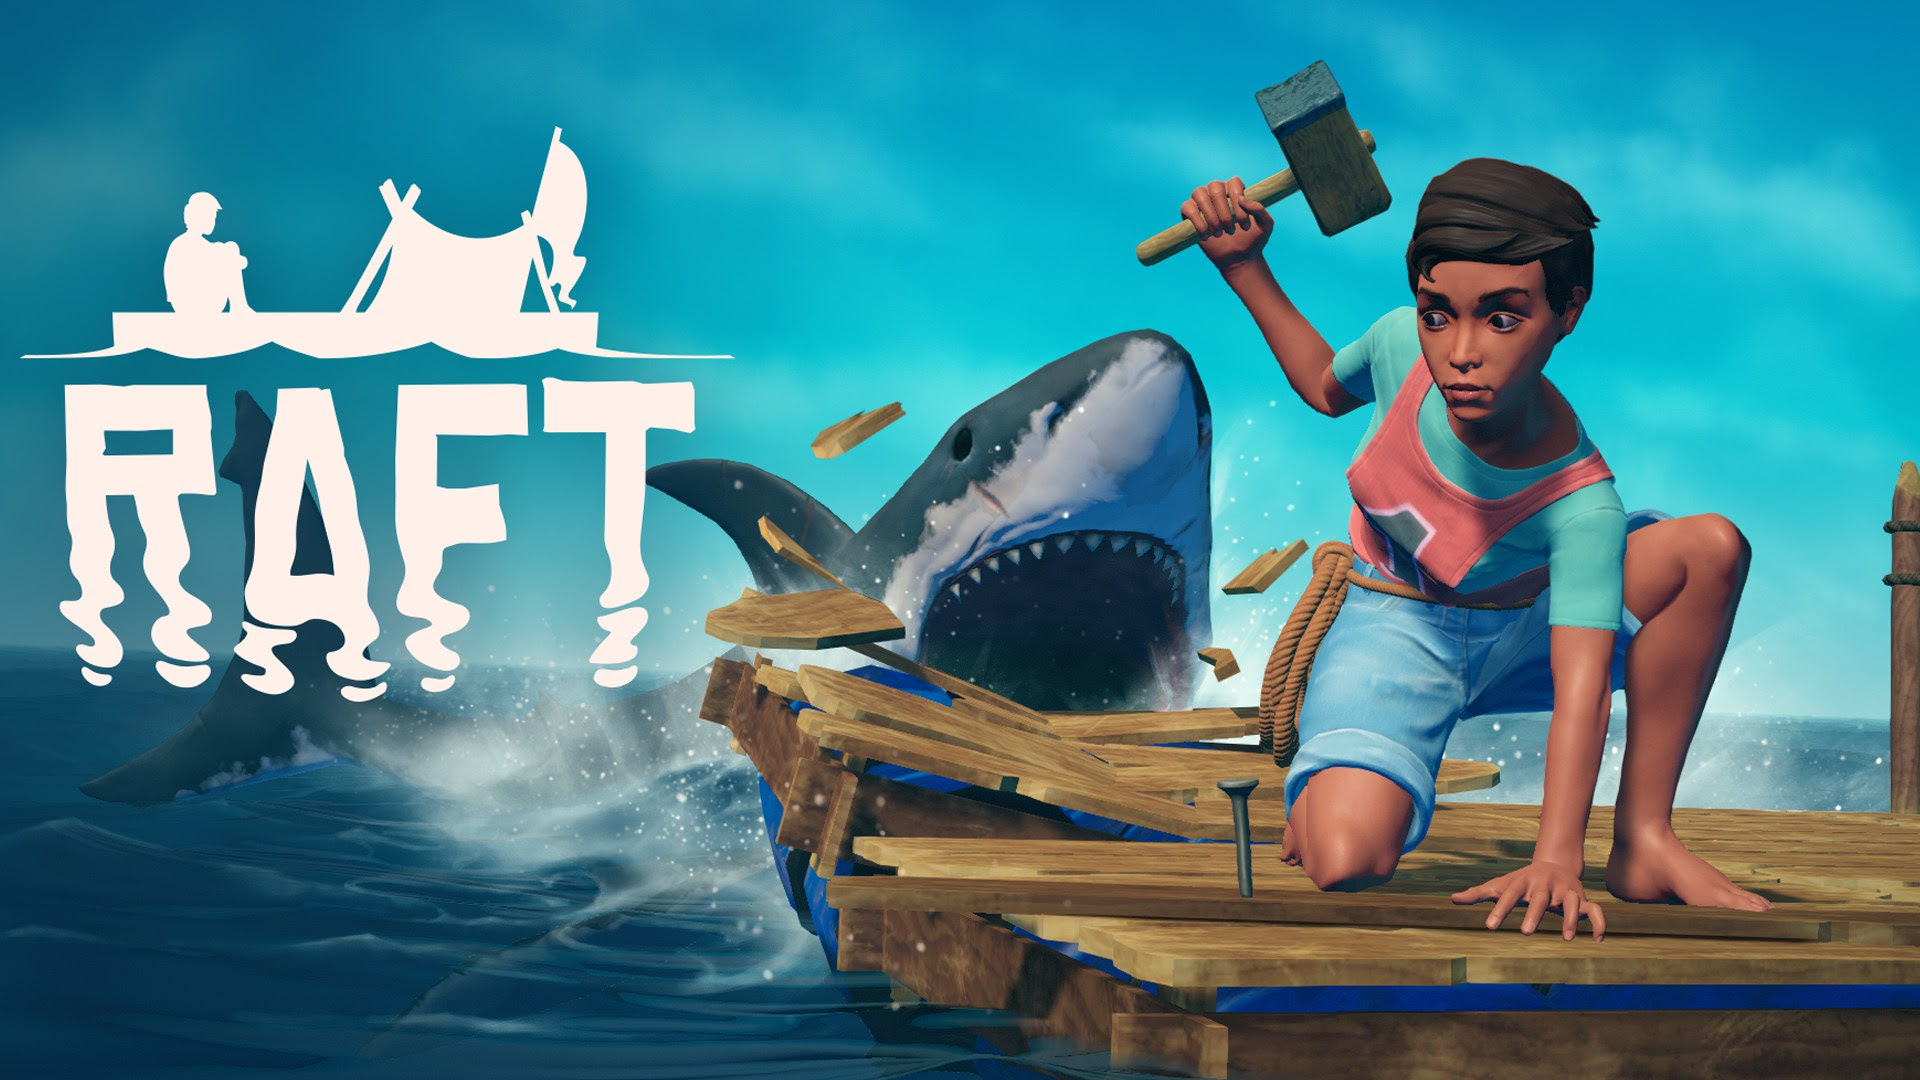  Raft HQ Background Images